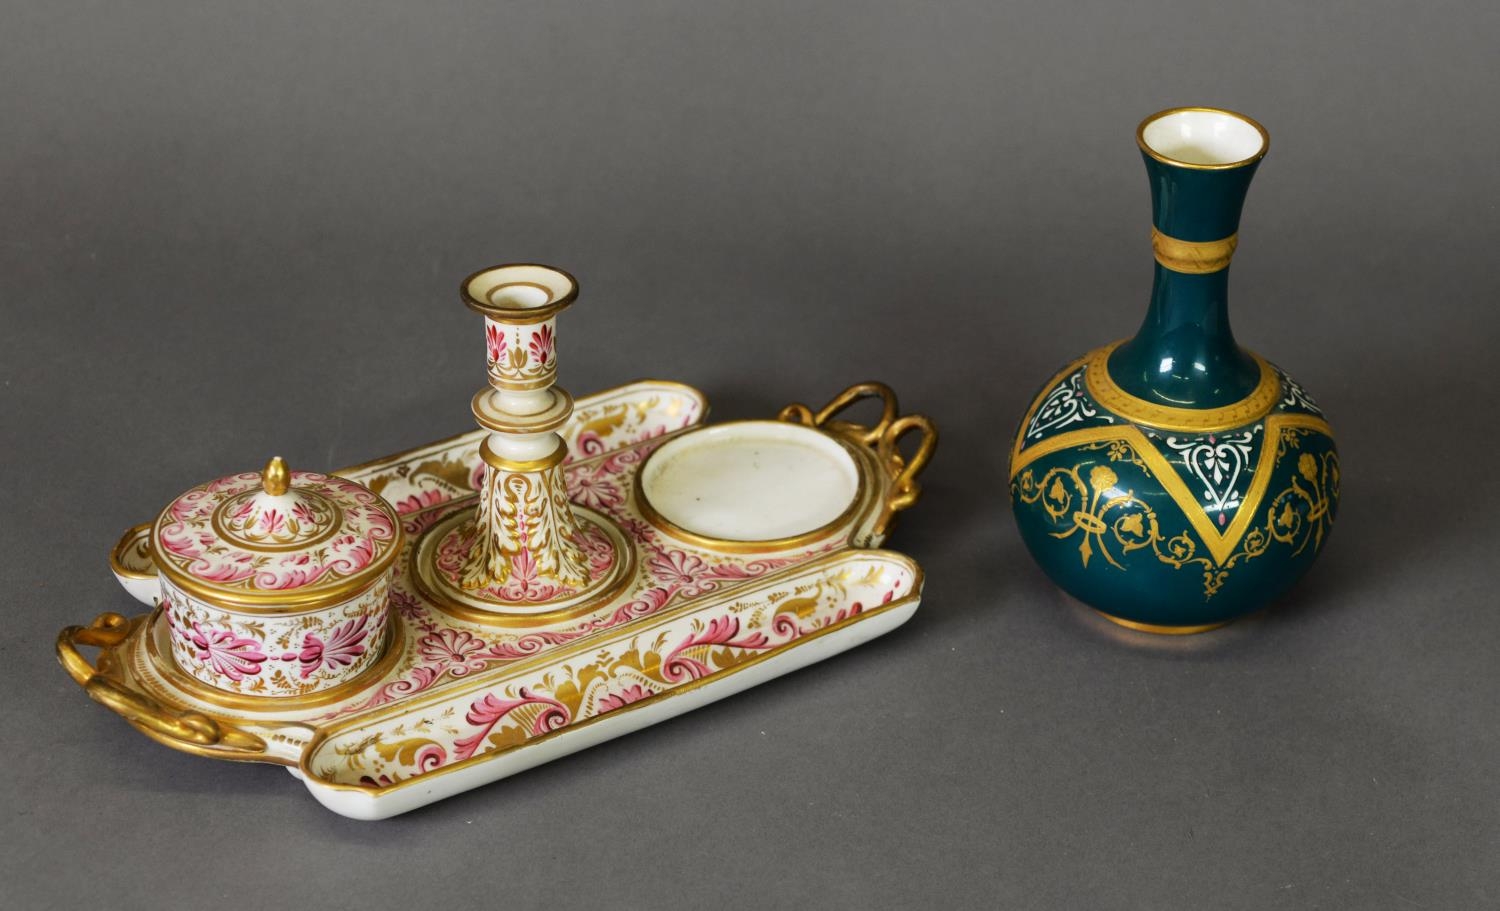 A 19TH CENTURY DERBY PORCELAIN DESK TIDY, decorated with painted and moulded scrolls and anthemion